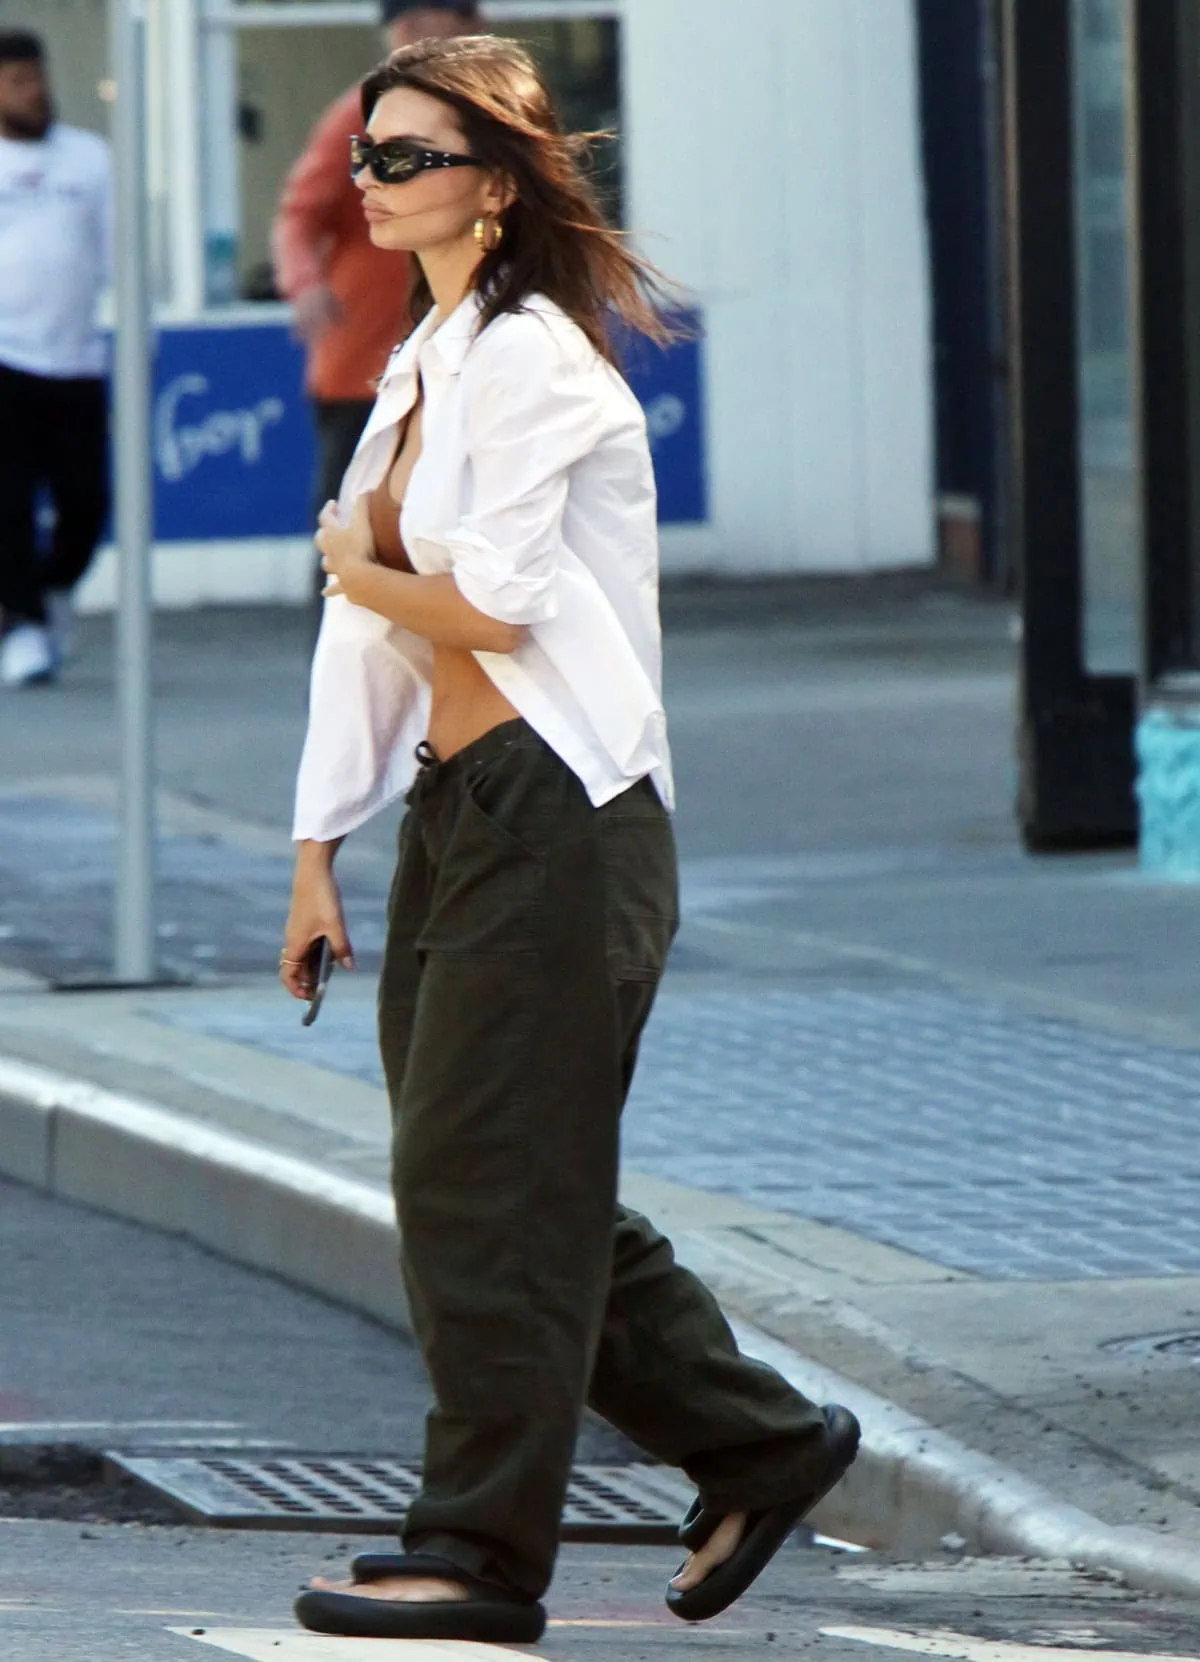 Emily Ratajkowski pairs a daring top with slouchy parachute pants for an effortlessly cool NYC stroll